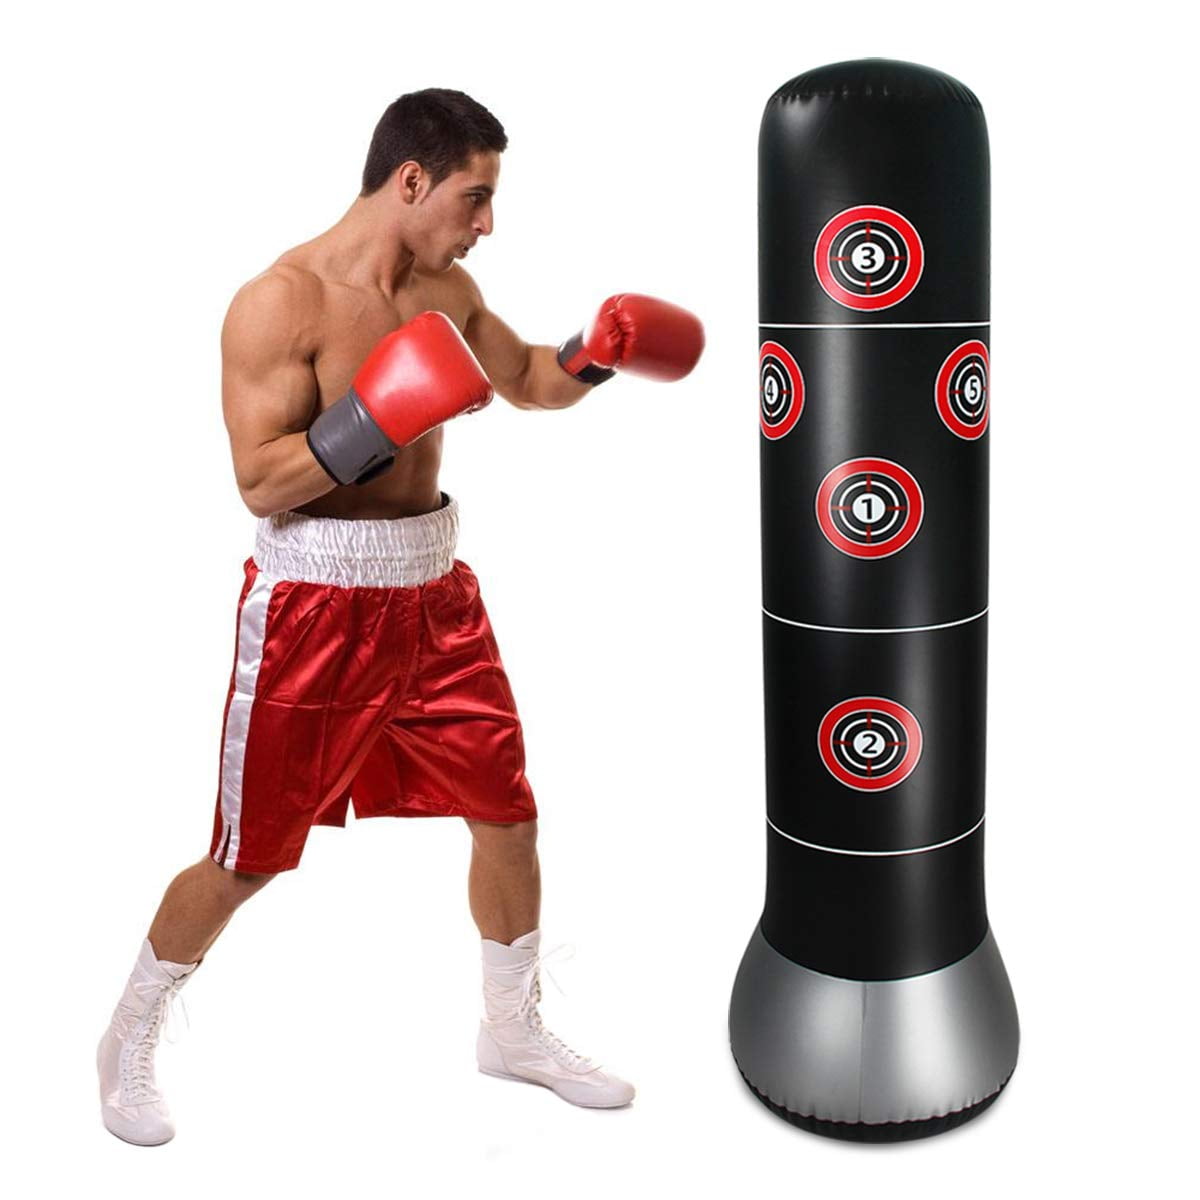 Fitness Punching Bag Inflatable Punching Tower Bag 150cm/4.9ft Freestanding F9R9 